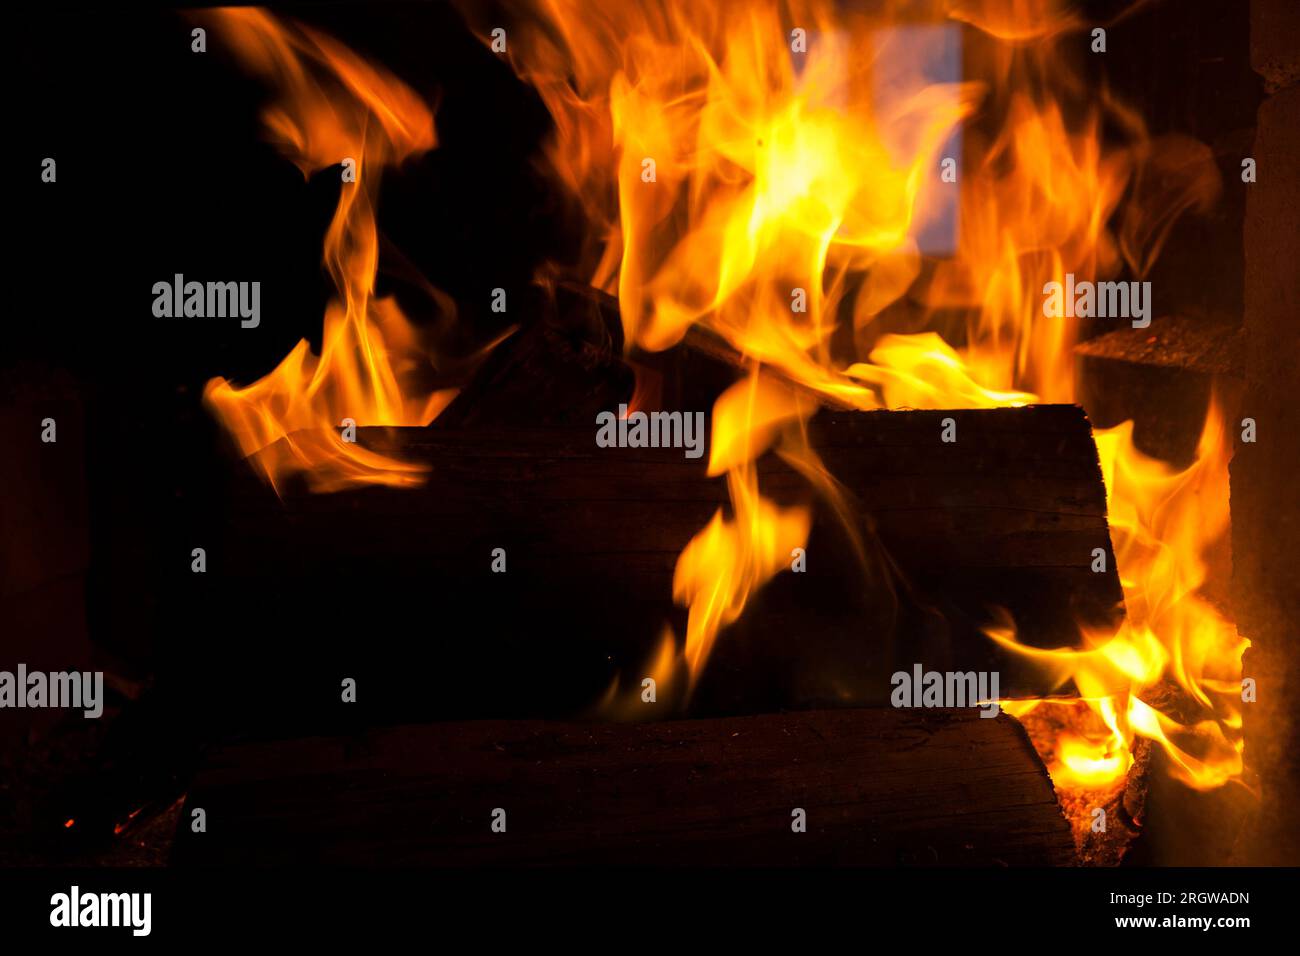 burning logs in the fire of a barbecue or stove or fireplace, the flame of the fire burns dry logs releasing heat and heating the room, close up of th Stock Photo